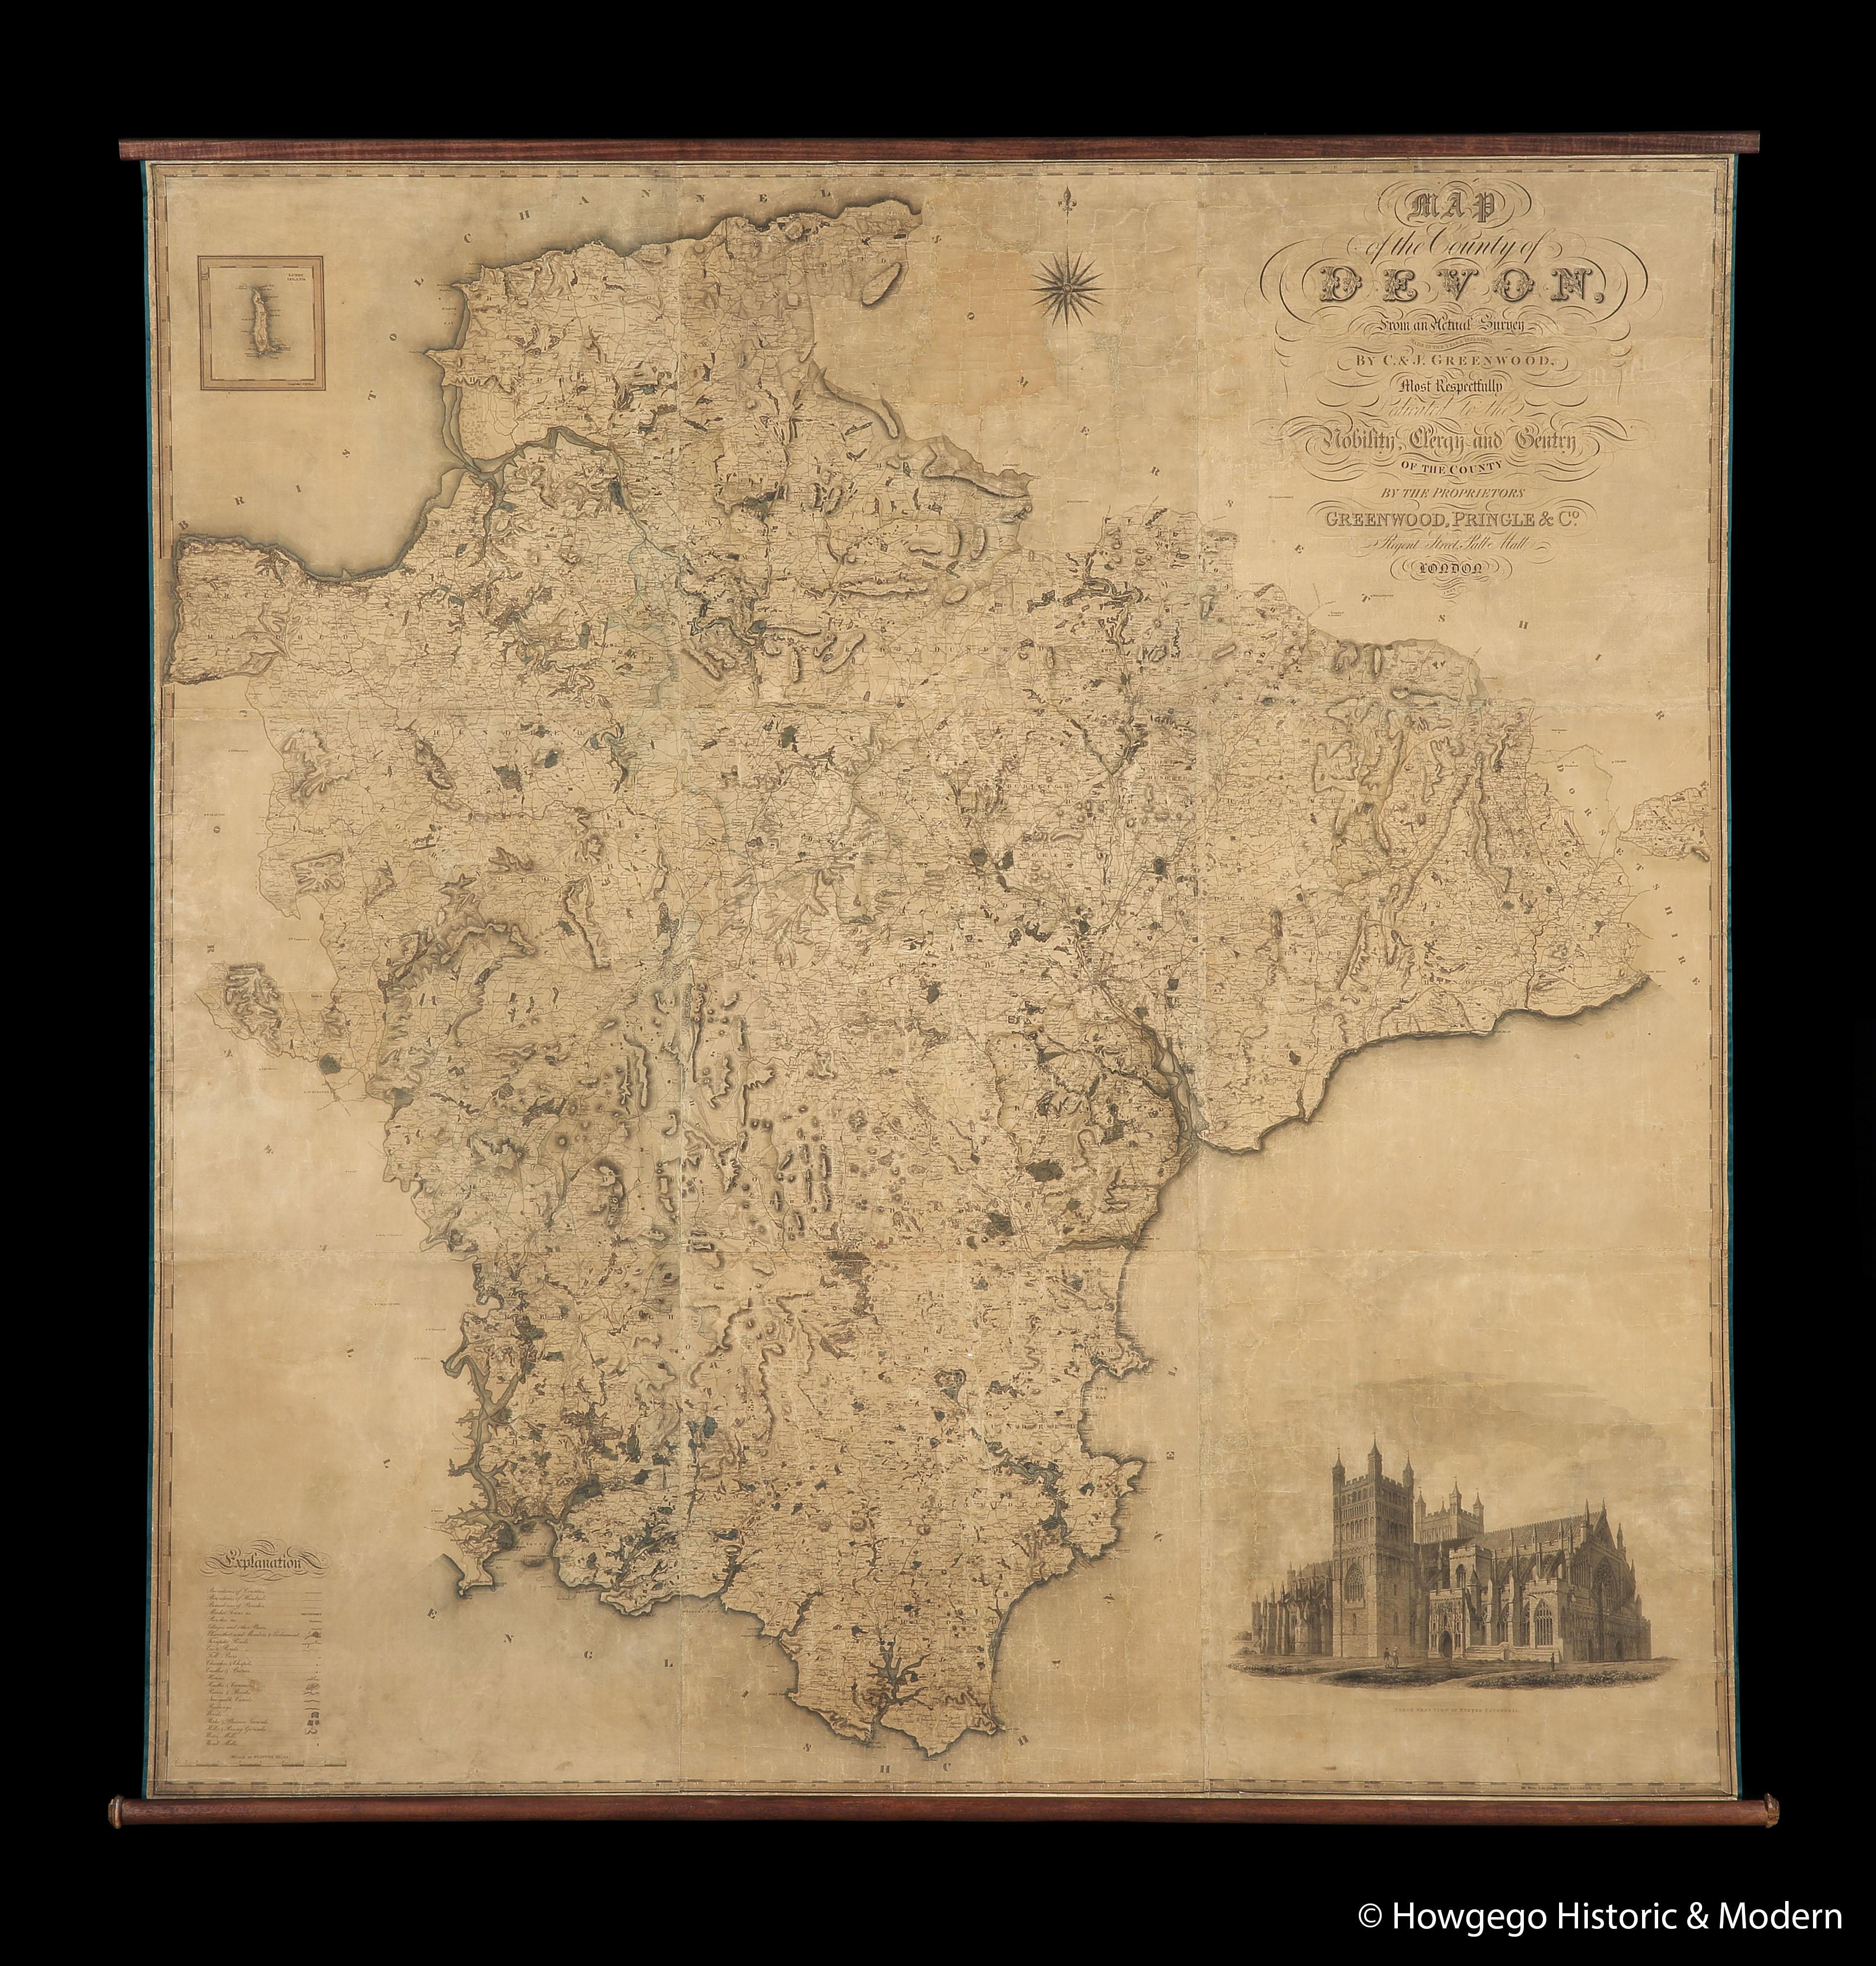 C & J GREENWOOD MAP OF THE COUNTY OF DEVON, FROM AN ORIGINAL SURVEY, PUBLISHED 1827, WITH ENGRAVING OF EXETER CATHEDRAL AND MAP OF LUNDY INSET, 6ft 2 ¼” long, 6ft 4¼” high

Printed on nine sheets of paper, assembled and re-lined on an Irish linen